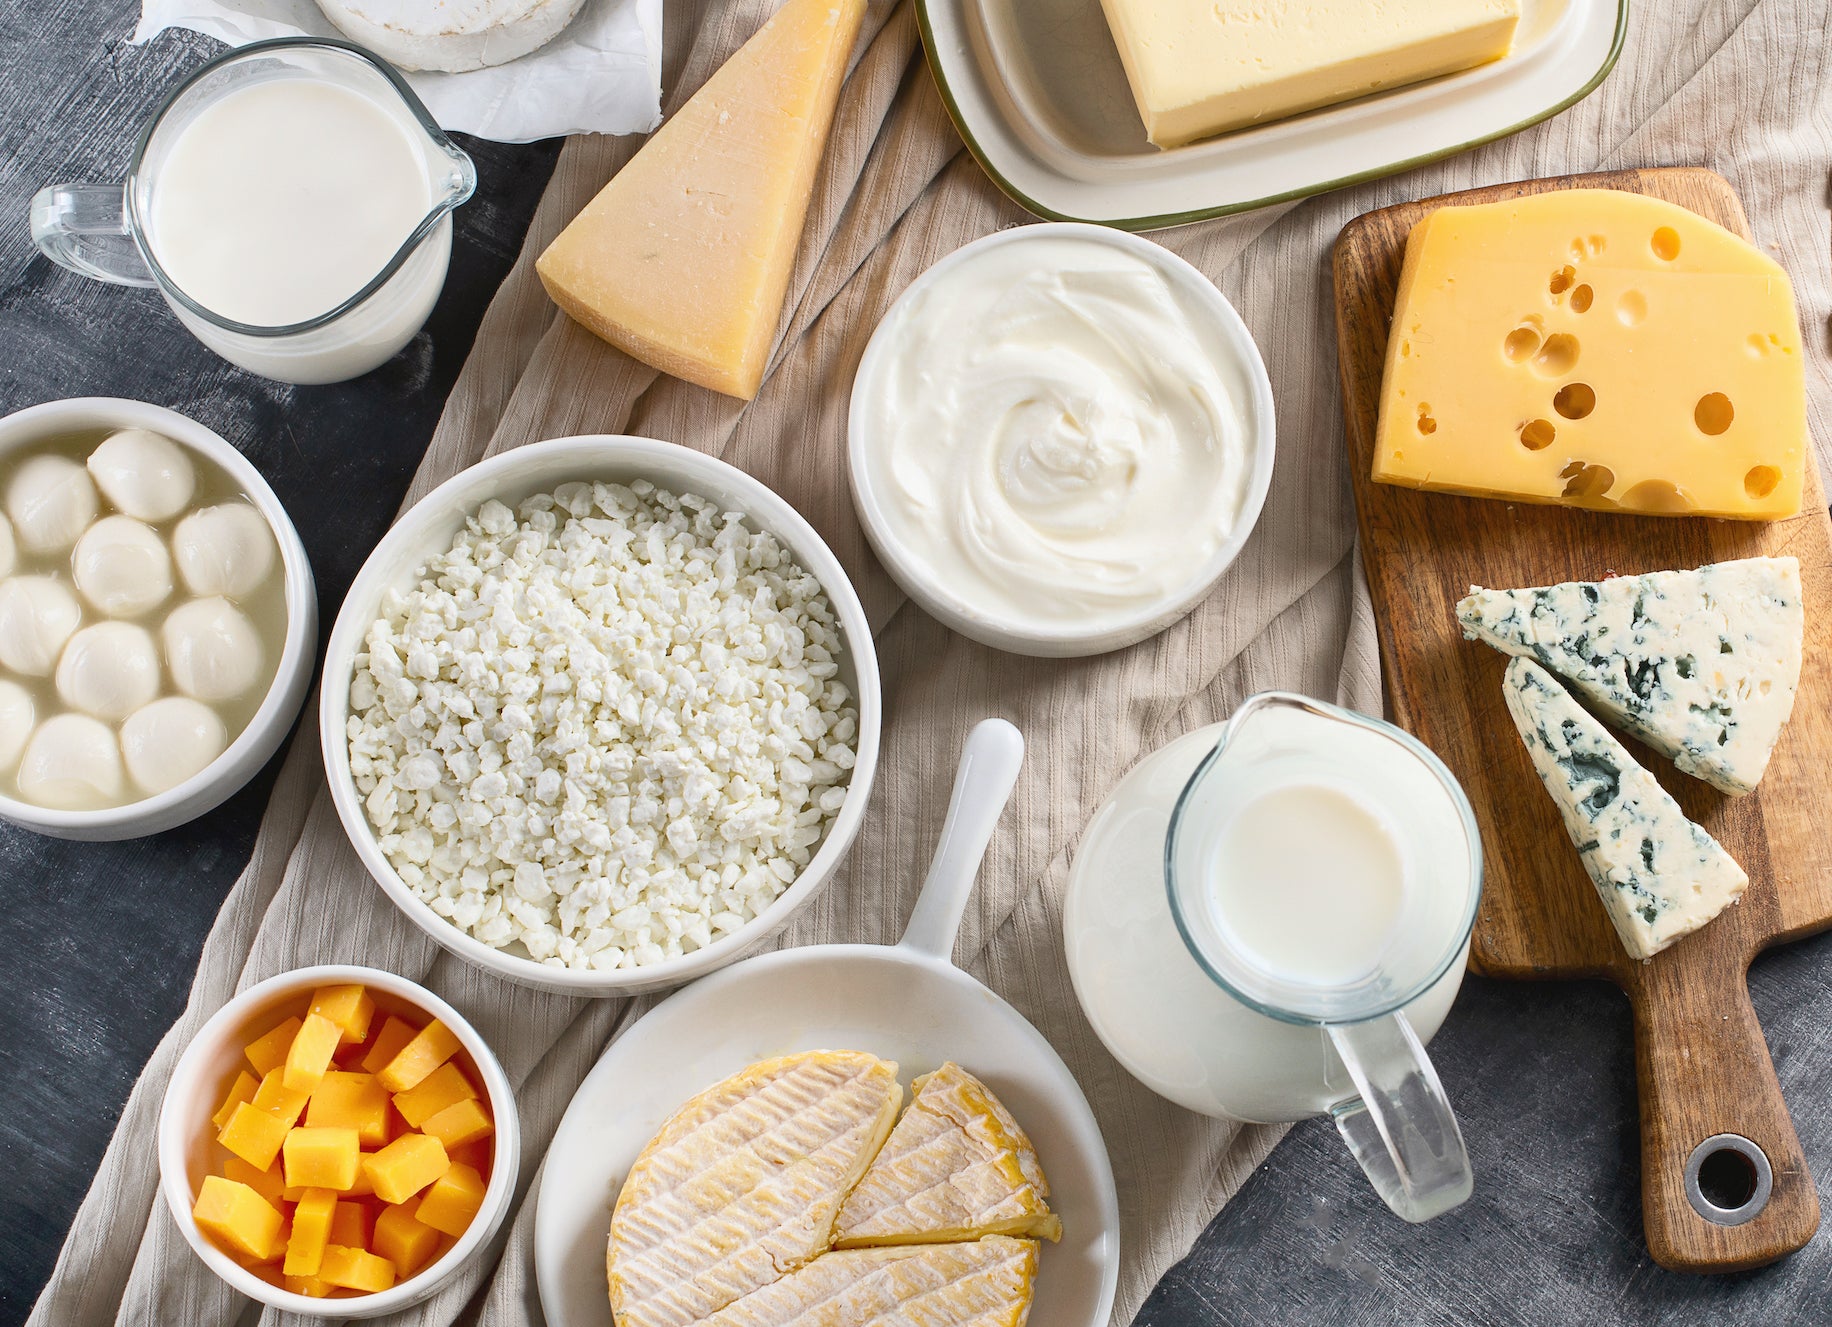 A variety of dairy foods including milk, yogurt and various cheeses including cheddar, swiss, blue cheese, mozzarella, brie